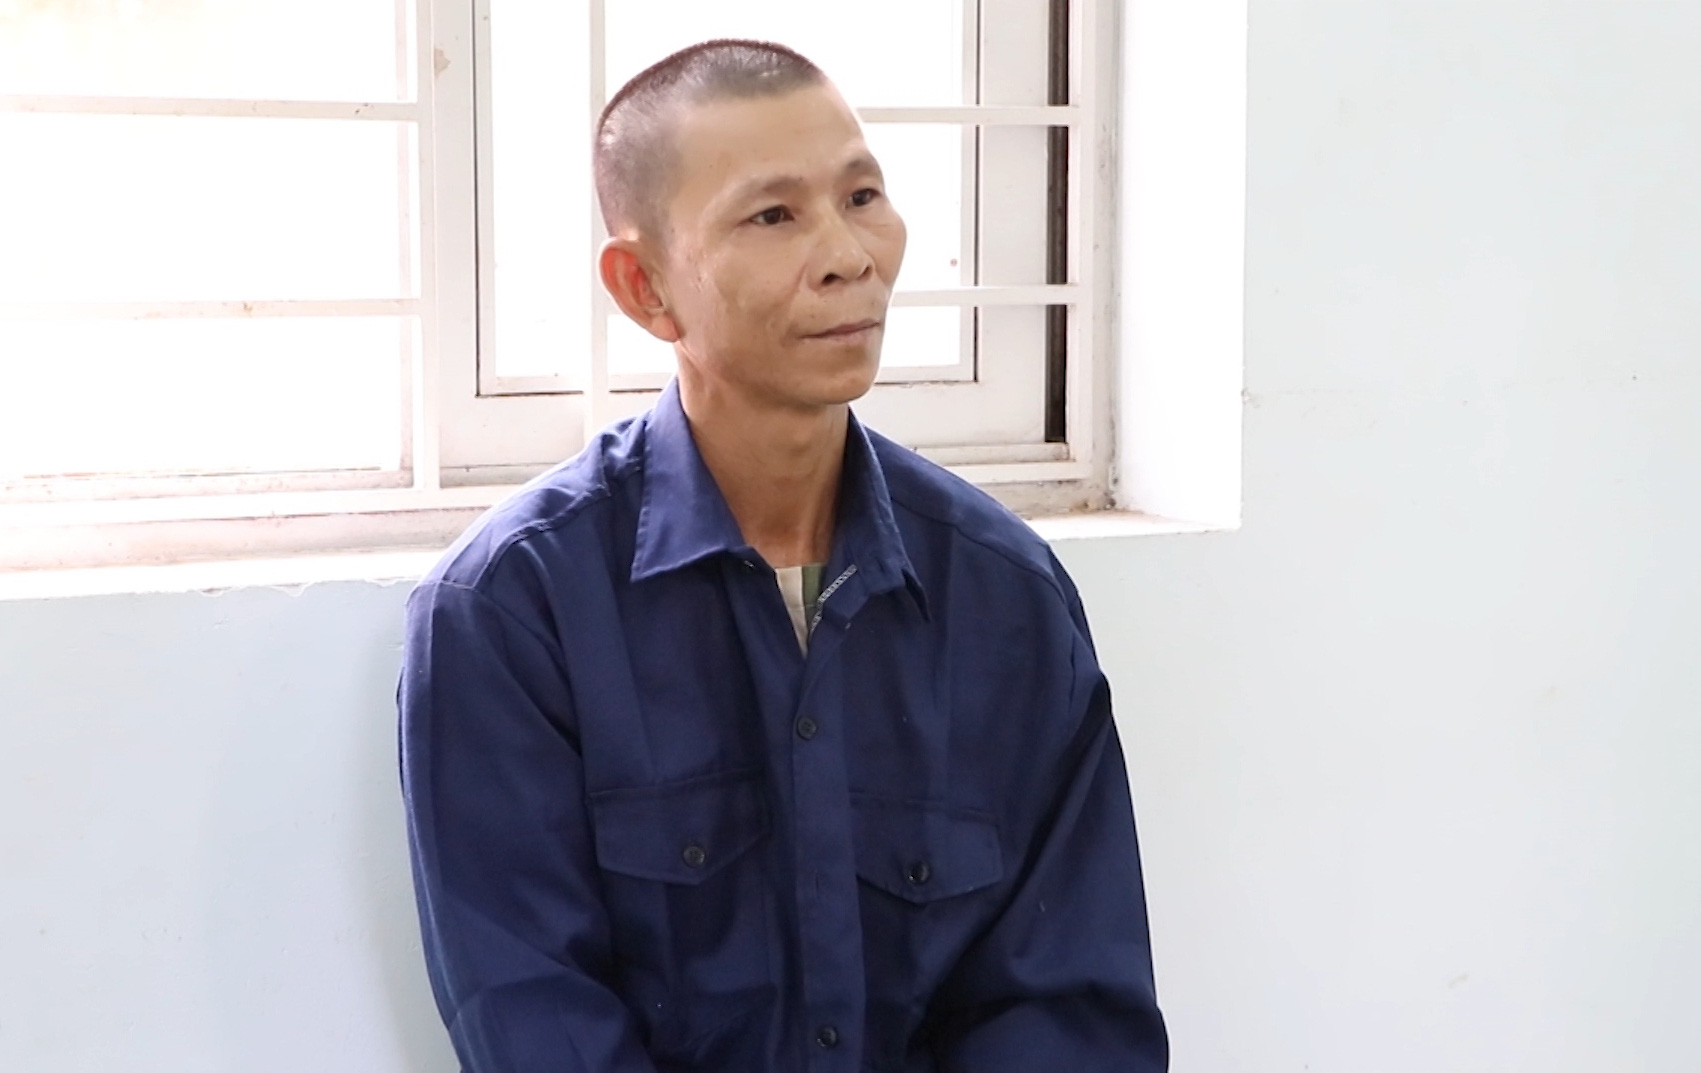 Man arrested for sex with 13-year-old girl in southern Vietnam